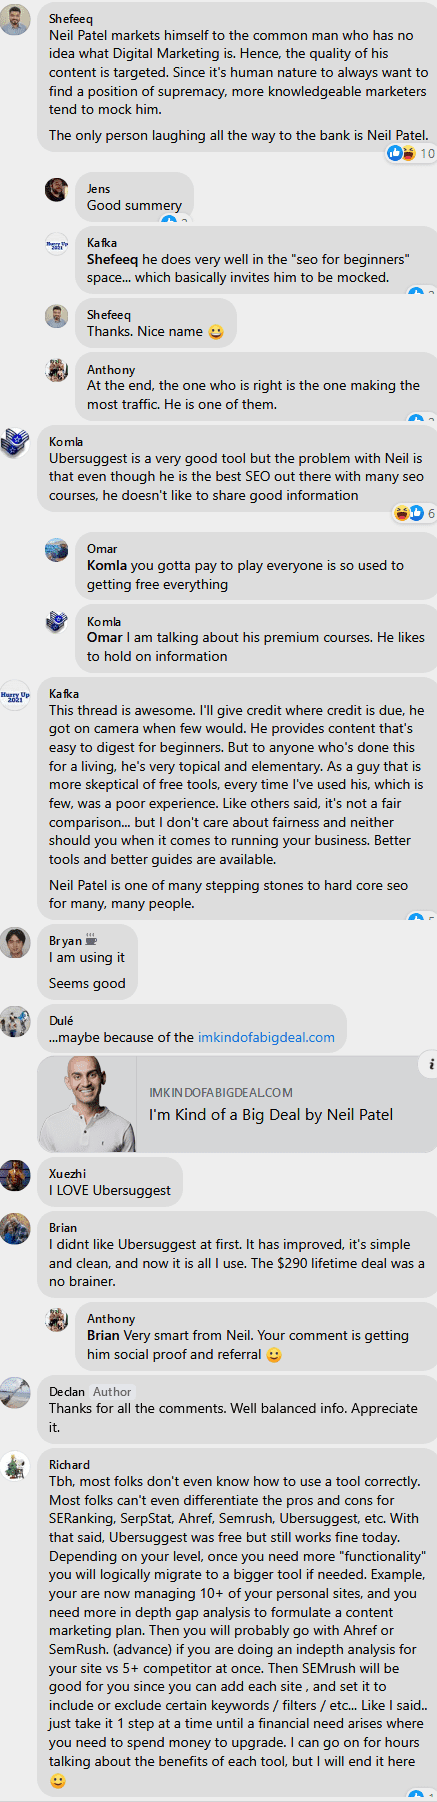 why do neil patel and ubersuggest seem funny